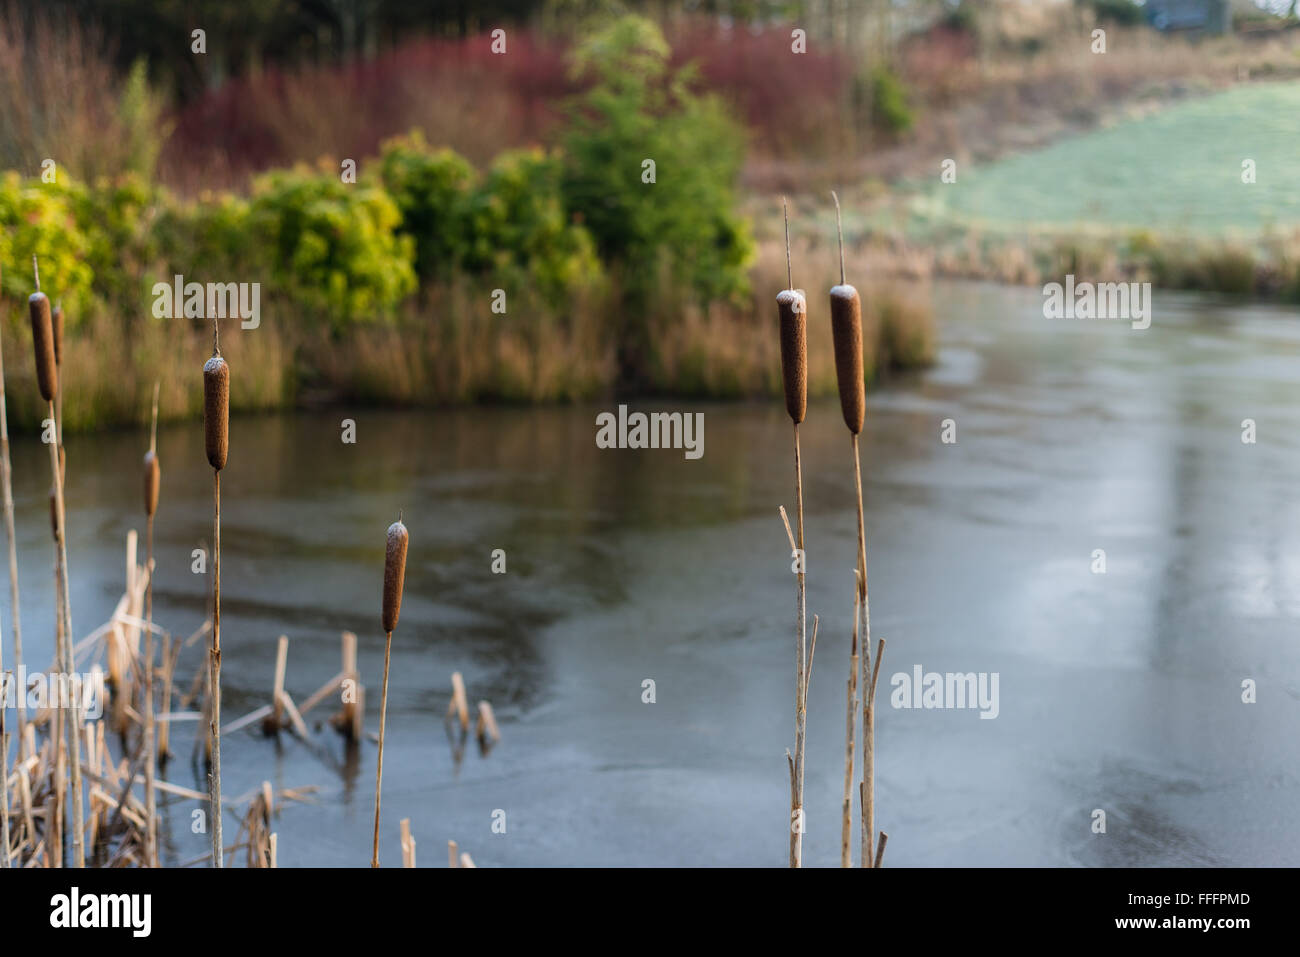 Reeds at the side of a frozen pond Stock Photo